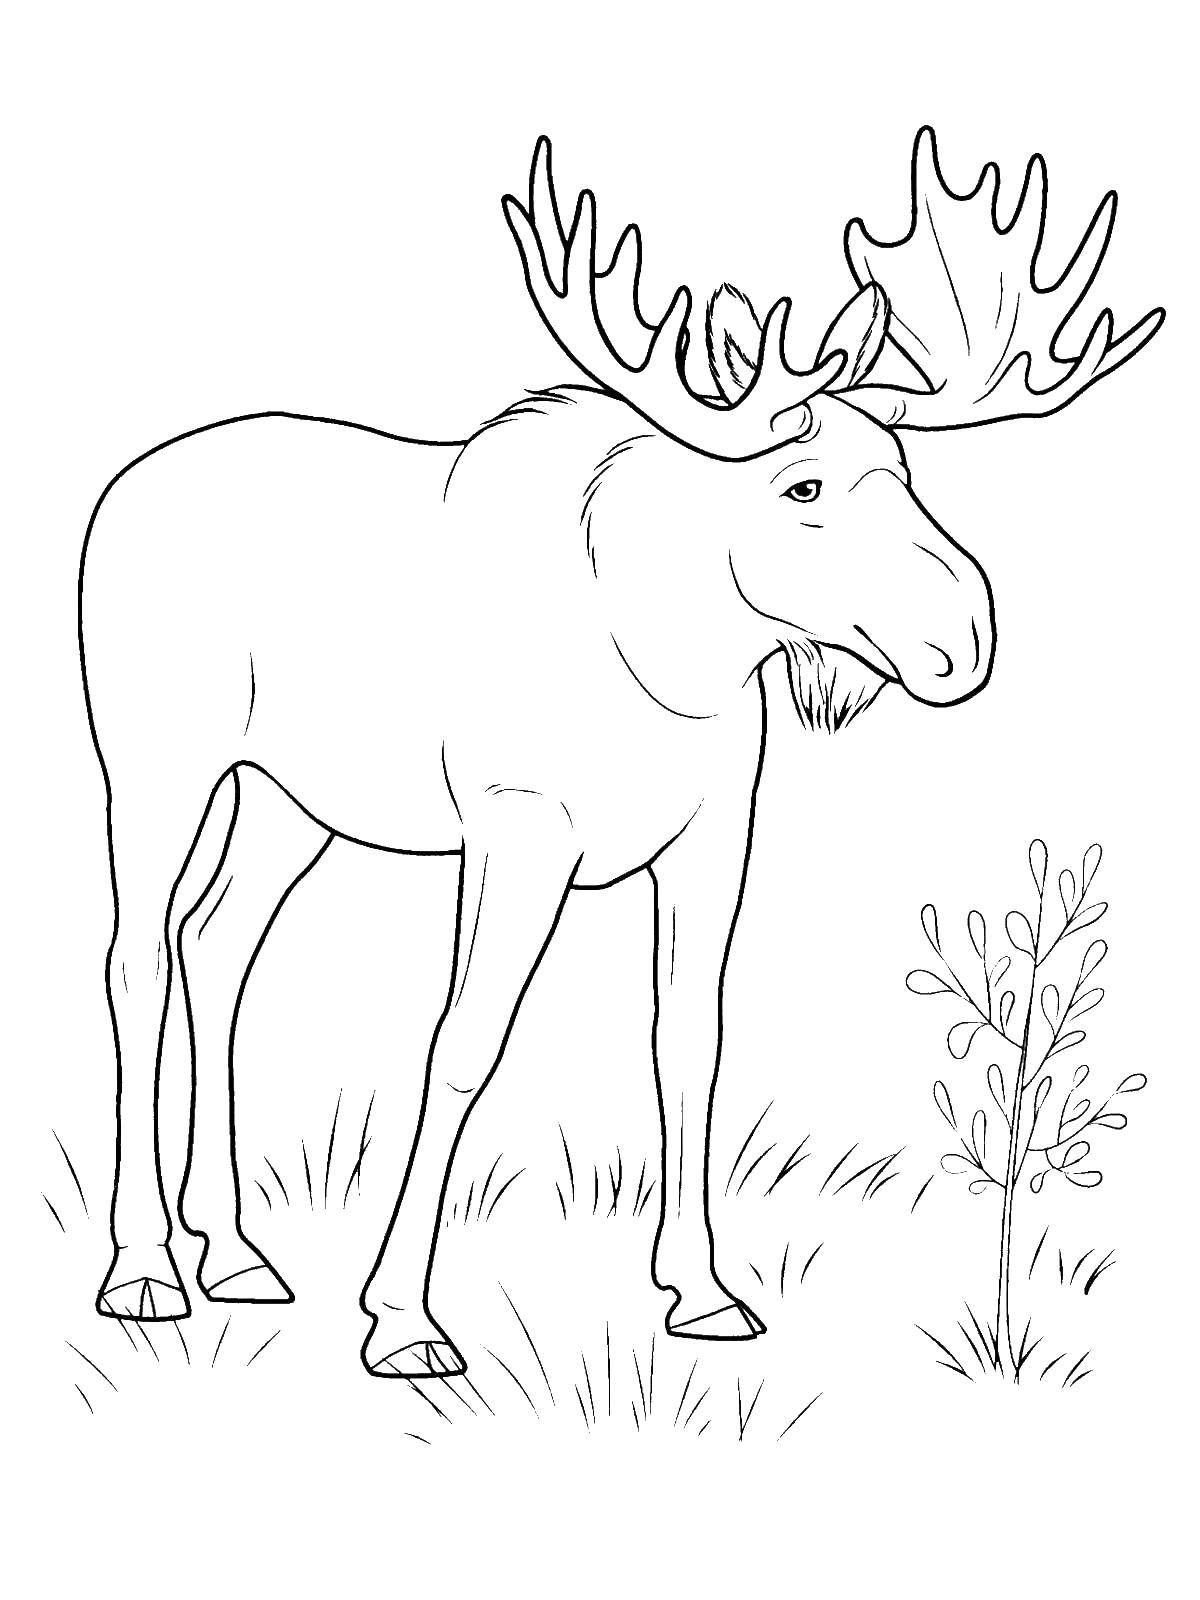 Coloring Deer. Category animals. Tags:  the deer.